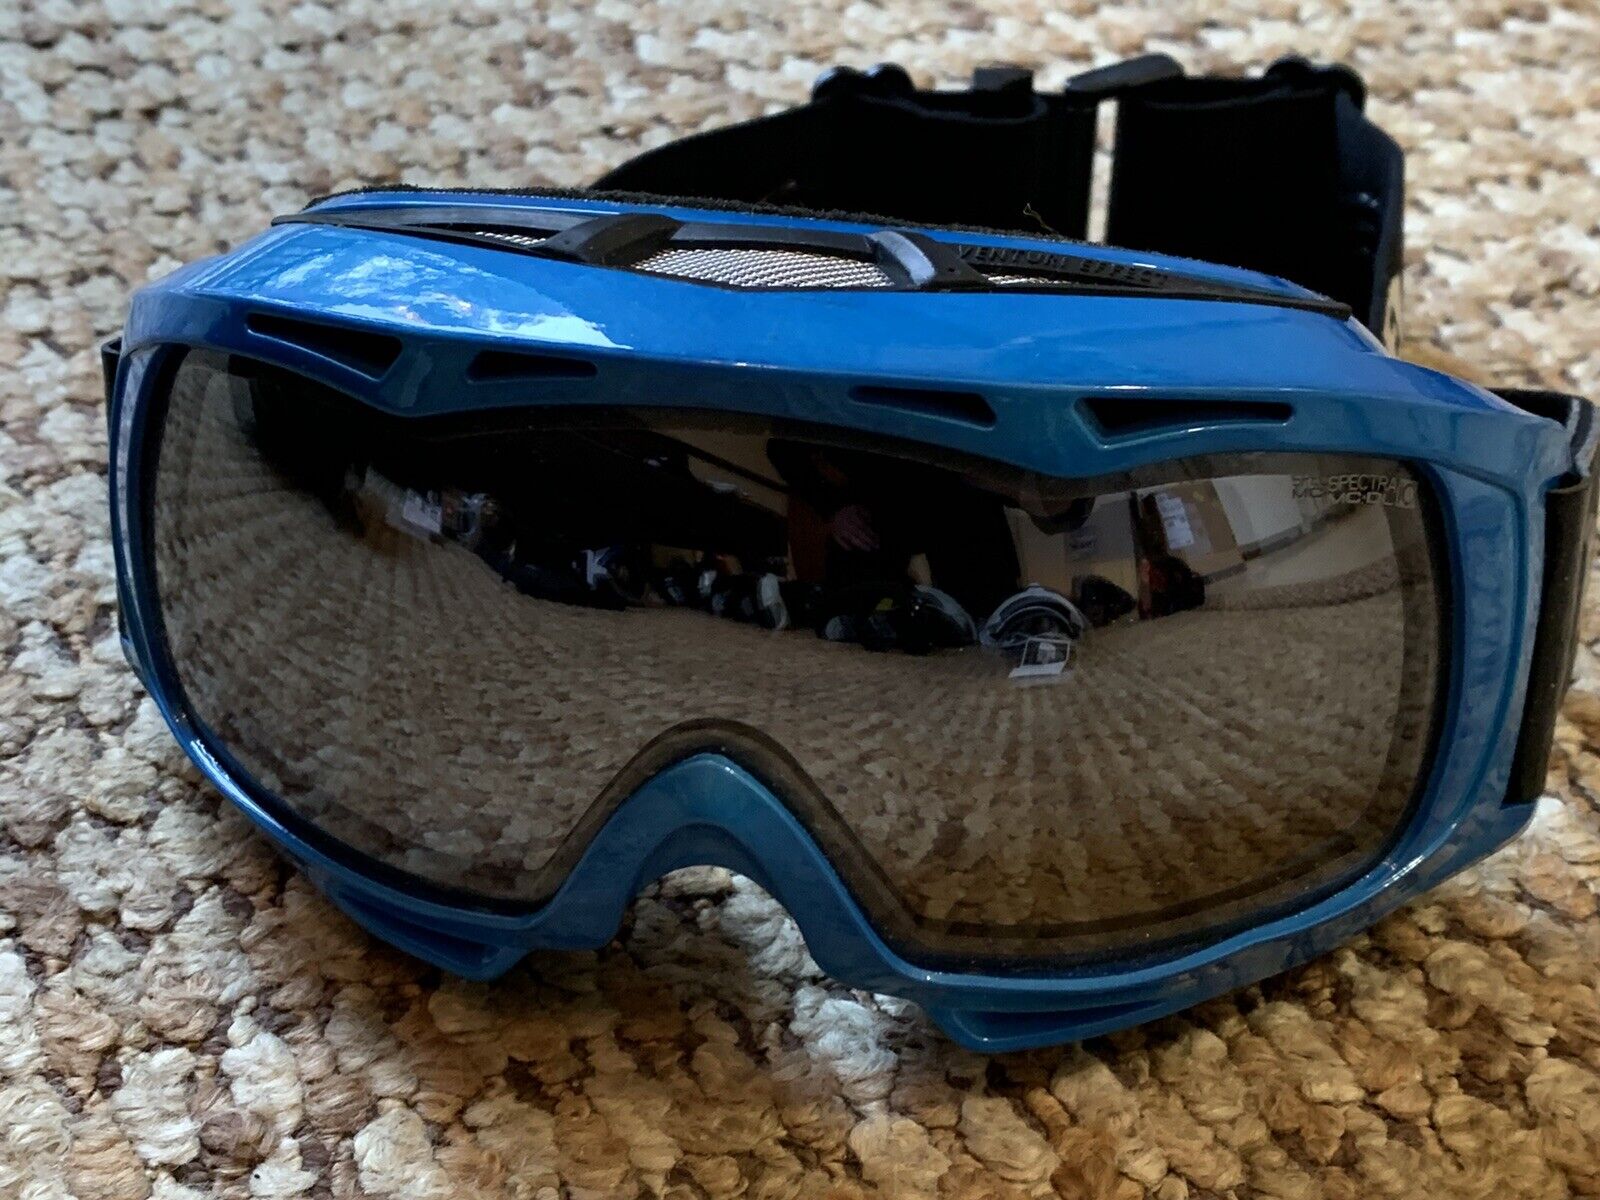 The North Face Ski Snow Goggles Blue Frames Red Lenses. Spectra 10.